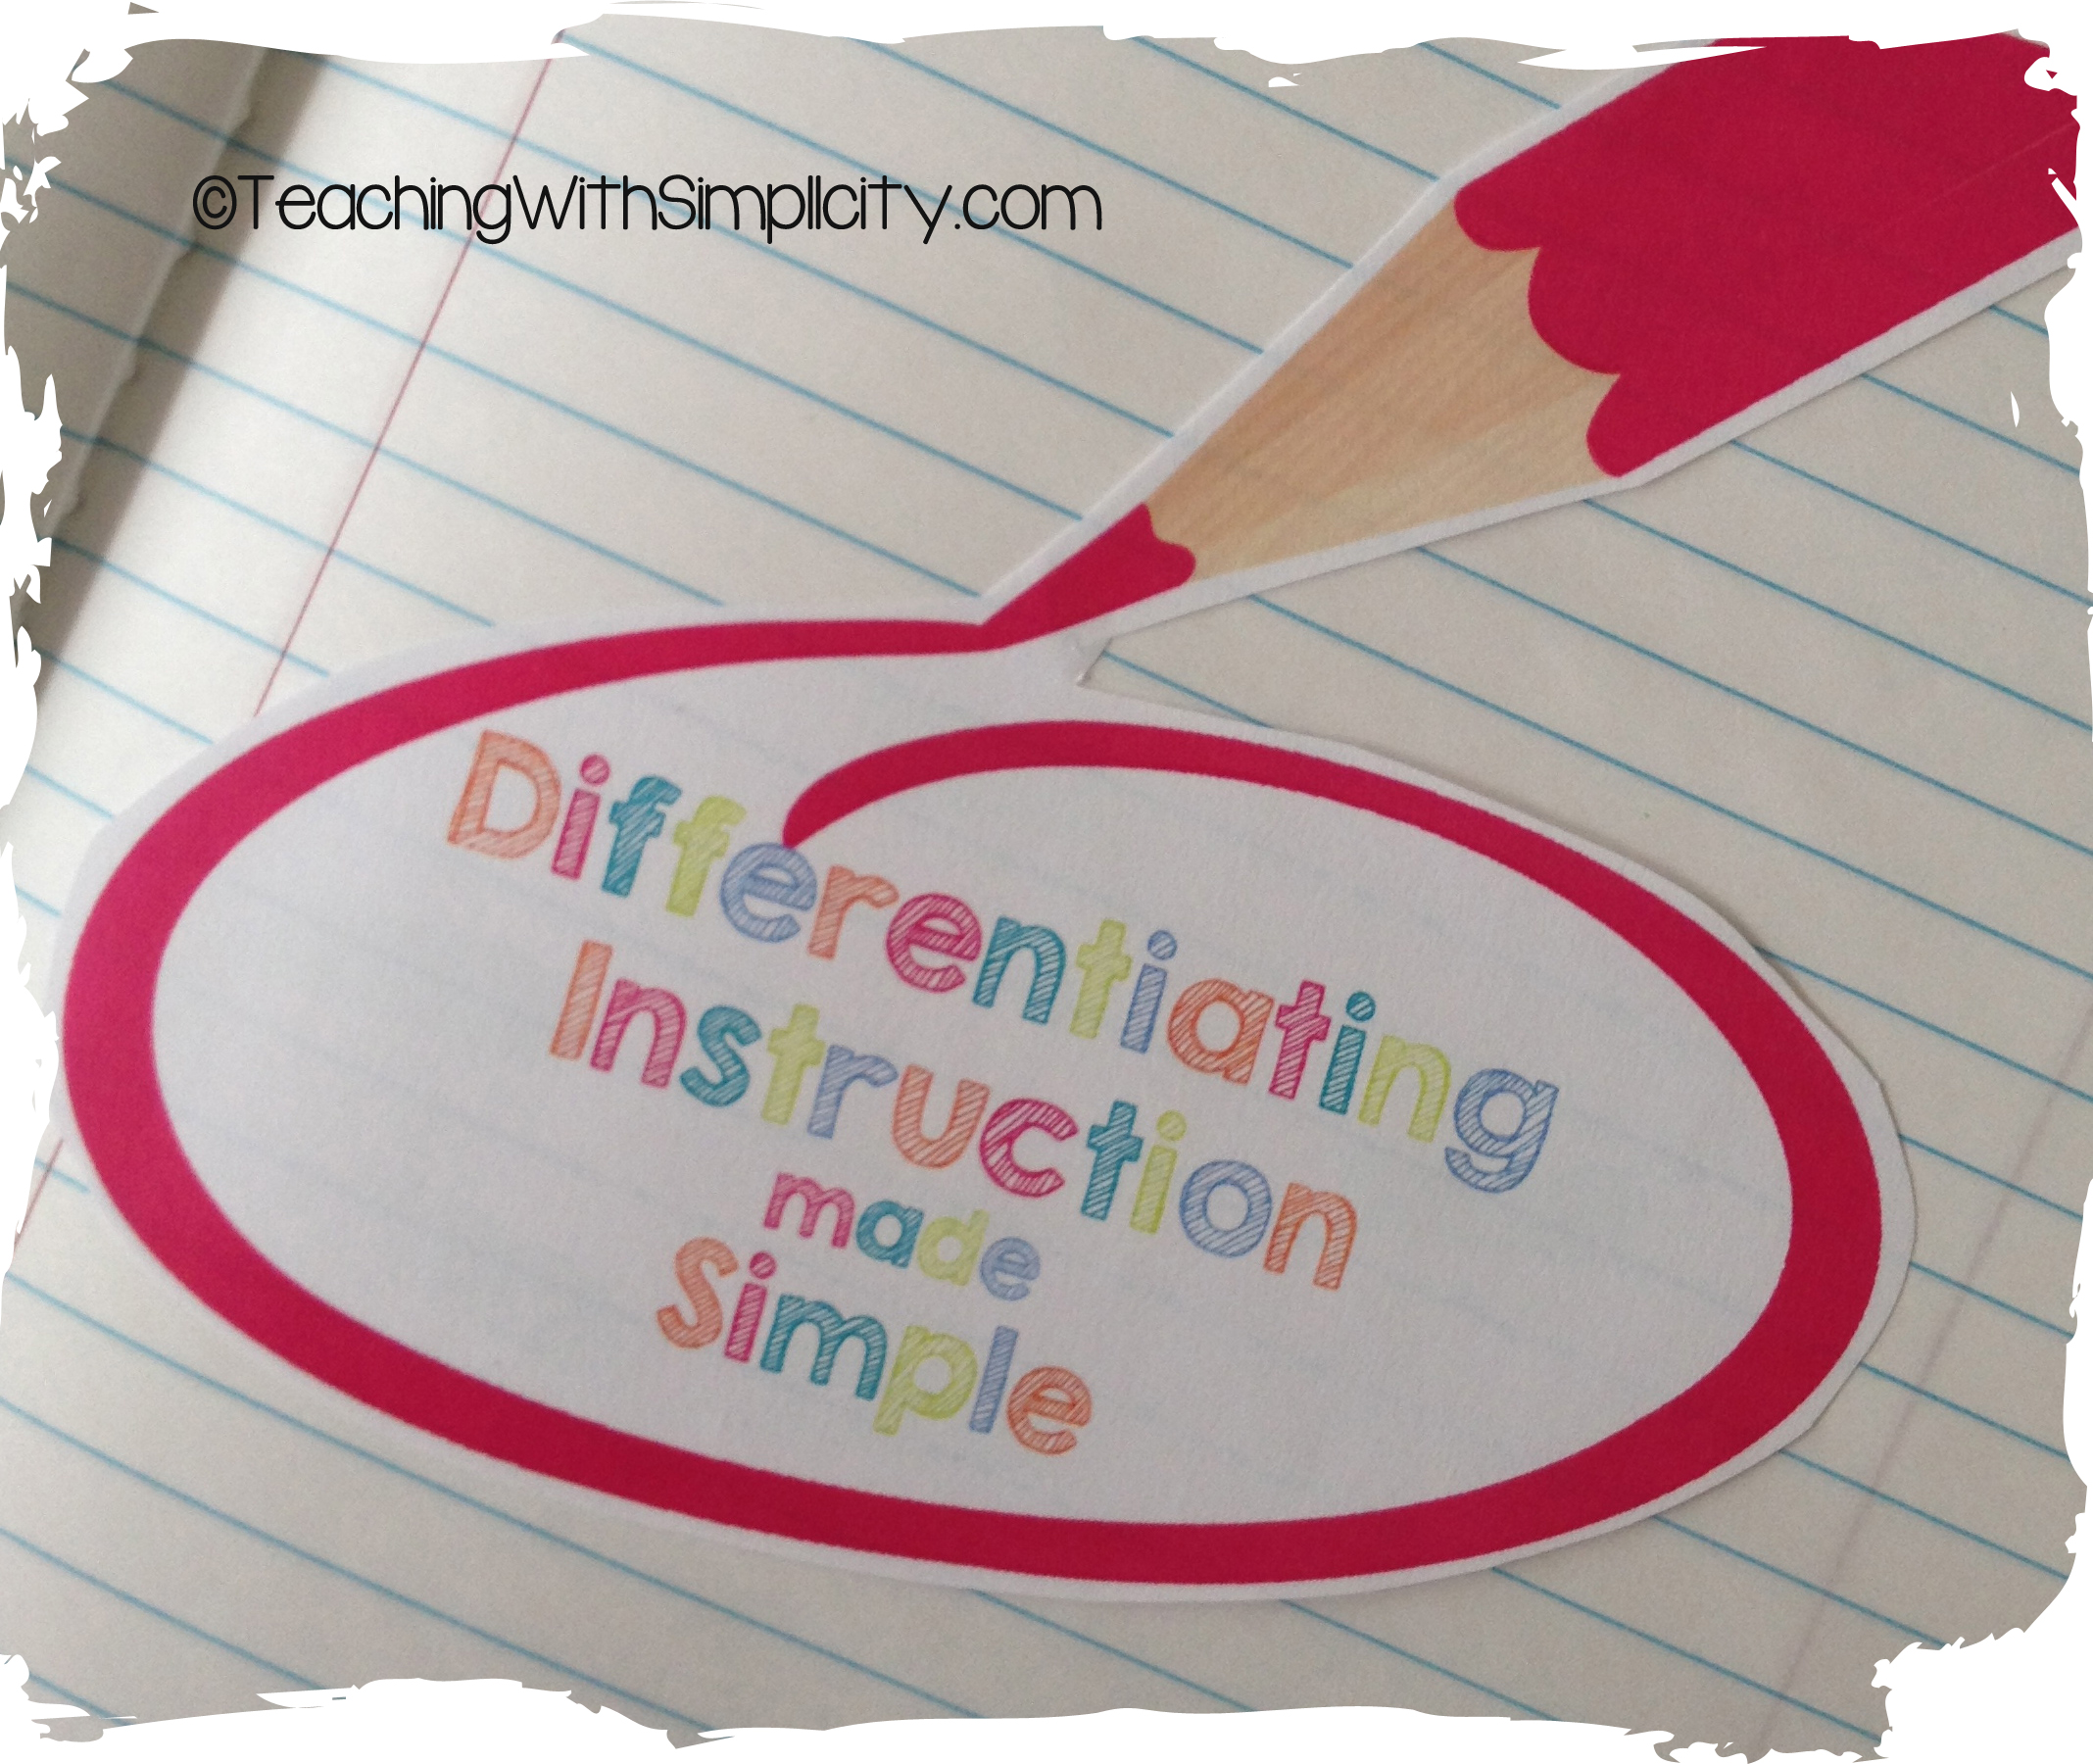 Differentiating Instruction Made Simple